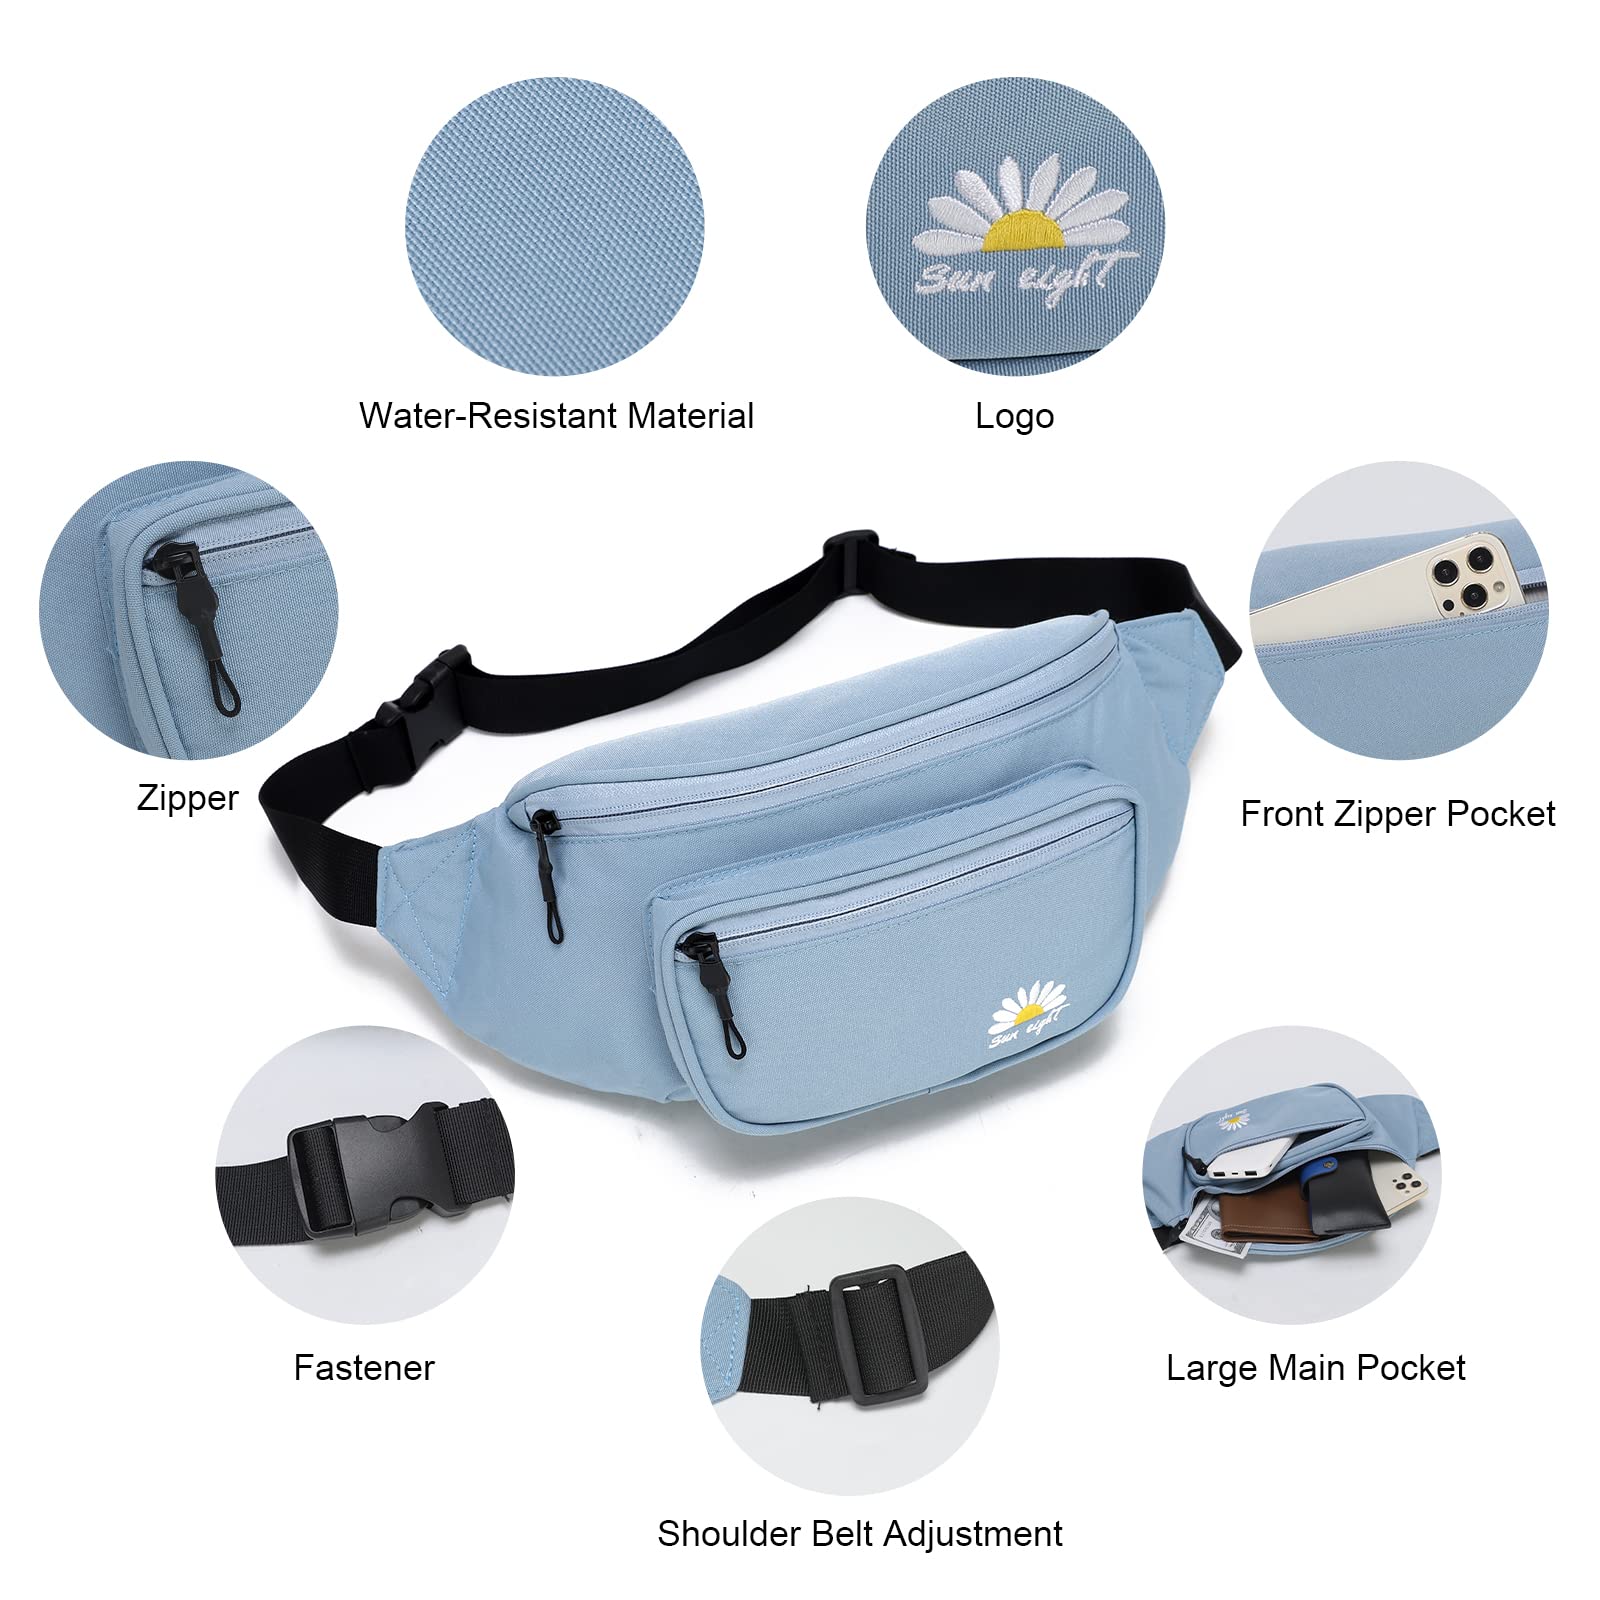 CaranY Festival Gear Fanny Pack for Men Women - Many Prints -Blue-Grey Crossbody Fanny Pack, Belt Bag with Adjustable Strap Cute Waist Bag for Festival Rave Hiking Running Cycling…